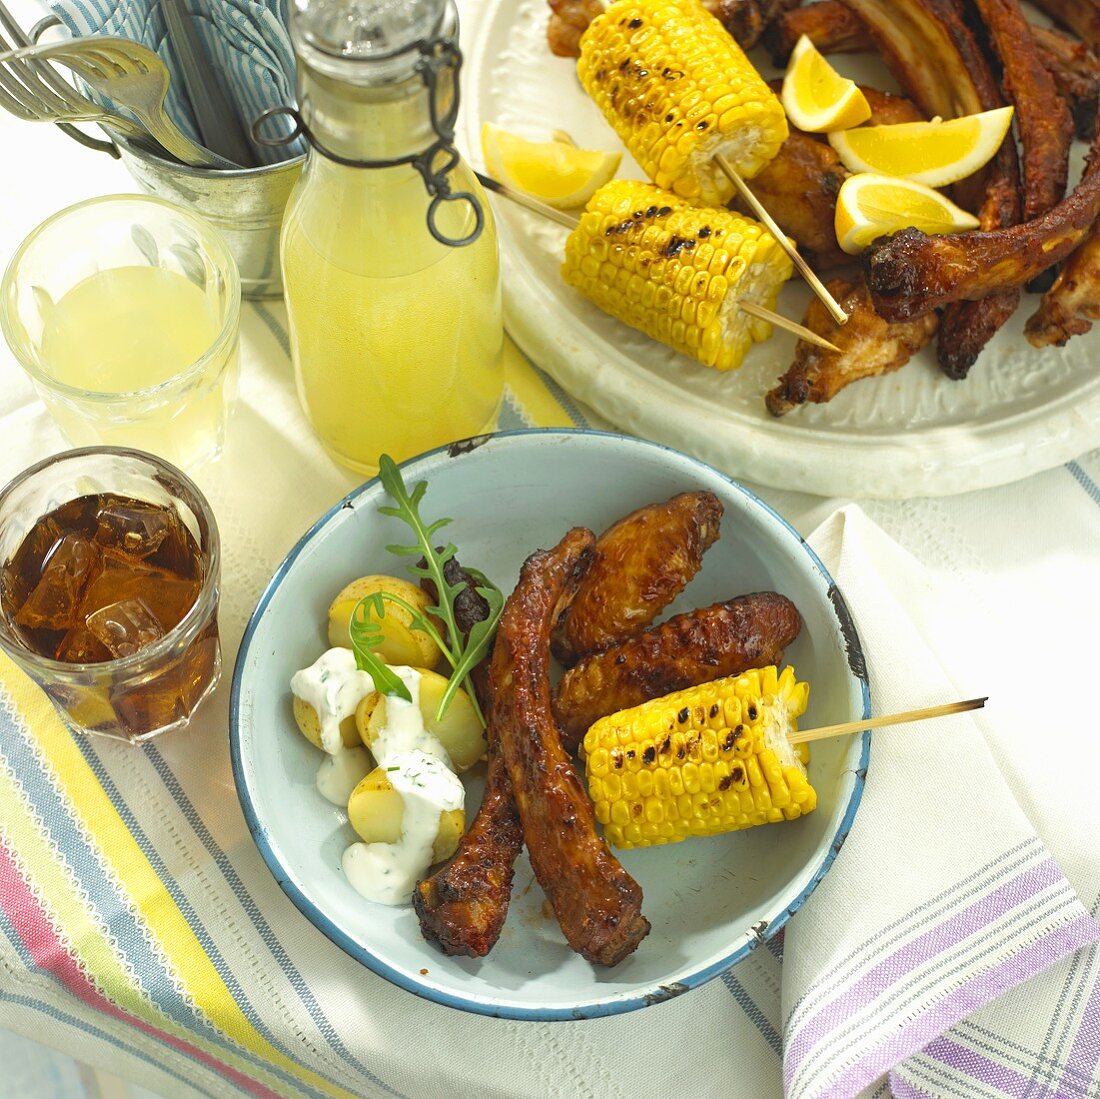 Barbecued ribs and corn on the cob, drinks